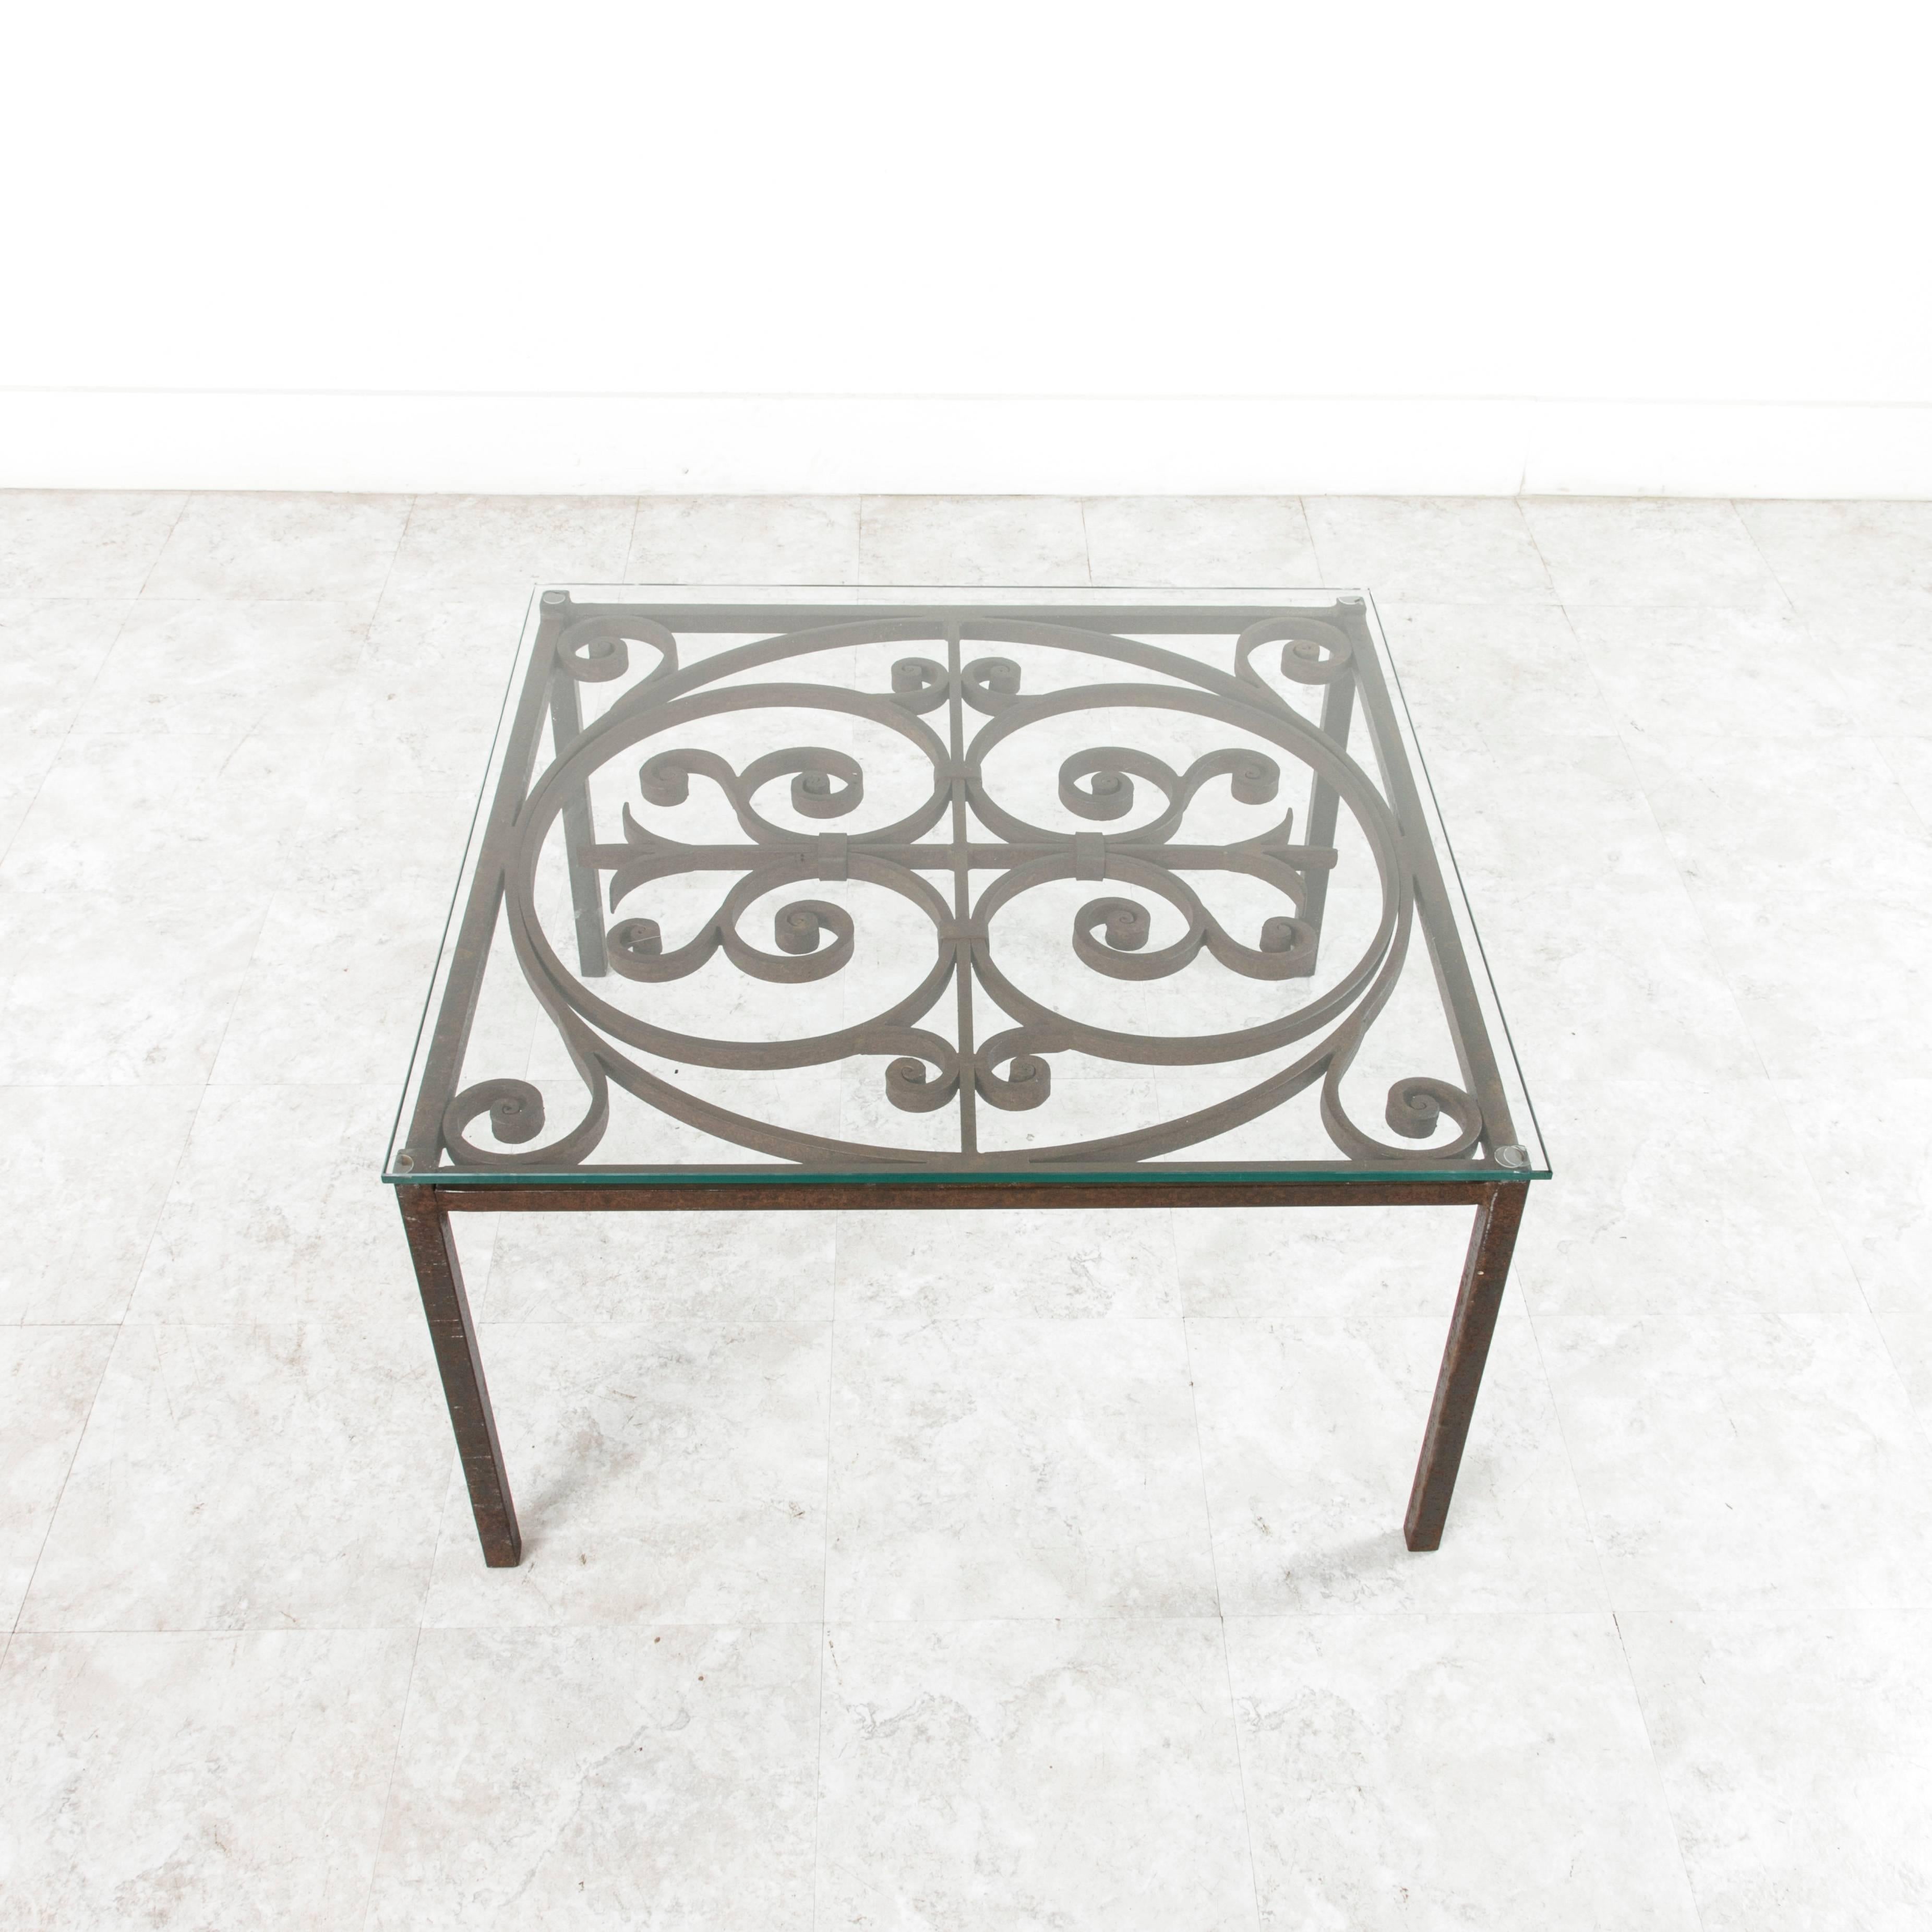 Created by artisans during the late 19th century in France, this hand-forged iron coffee table would function well for indoor or outdoor conversation spaces. The top is new 3/8 inch glass.
 